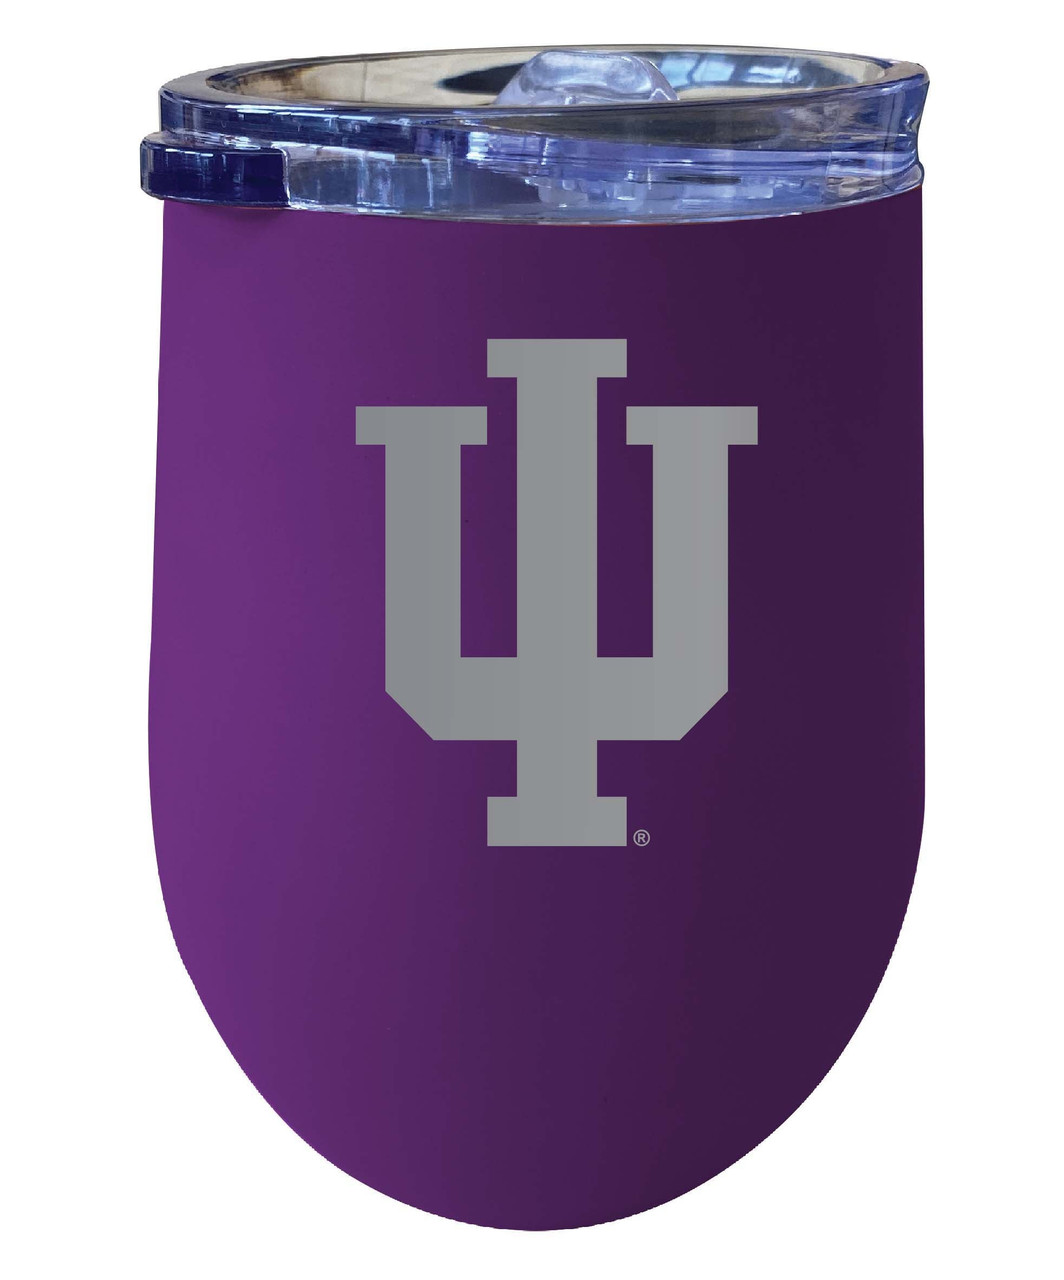 Indiana Hoosiers 12 oz Etched Insulated Wine Stainless Steel Tumbler Purple